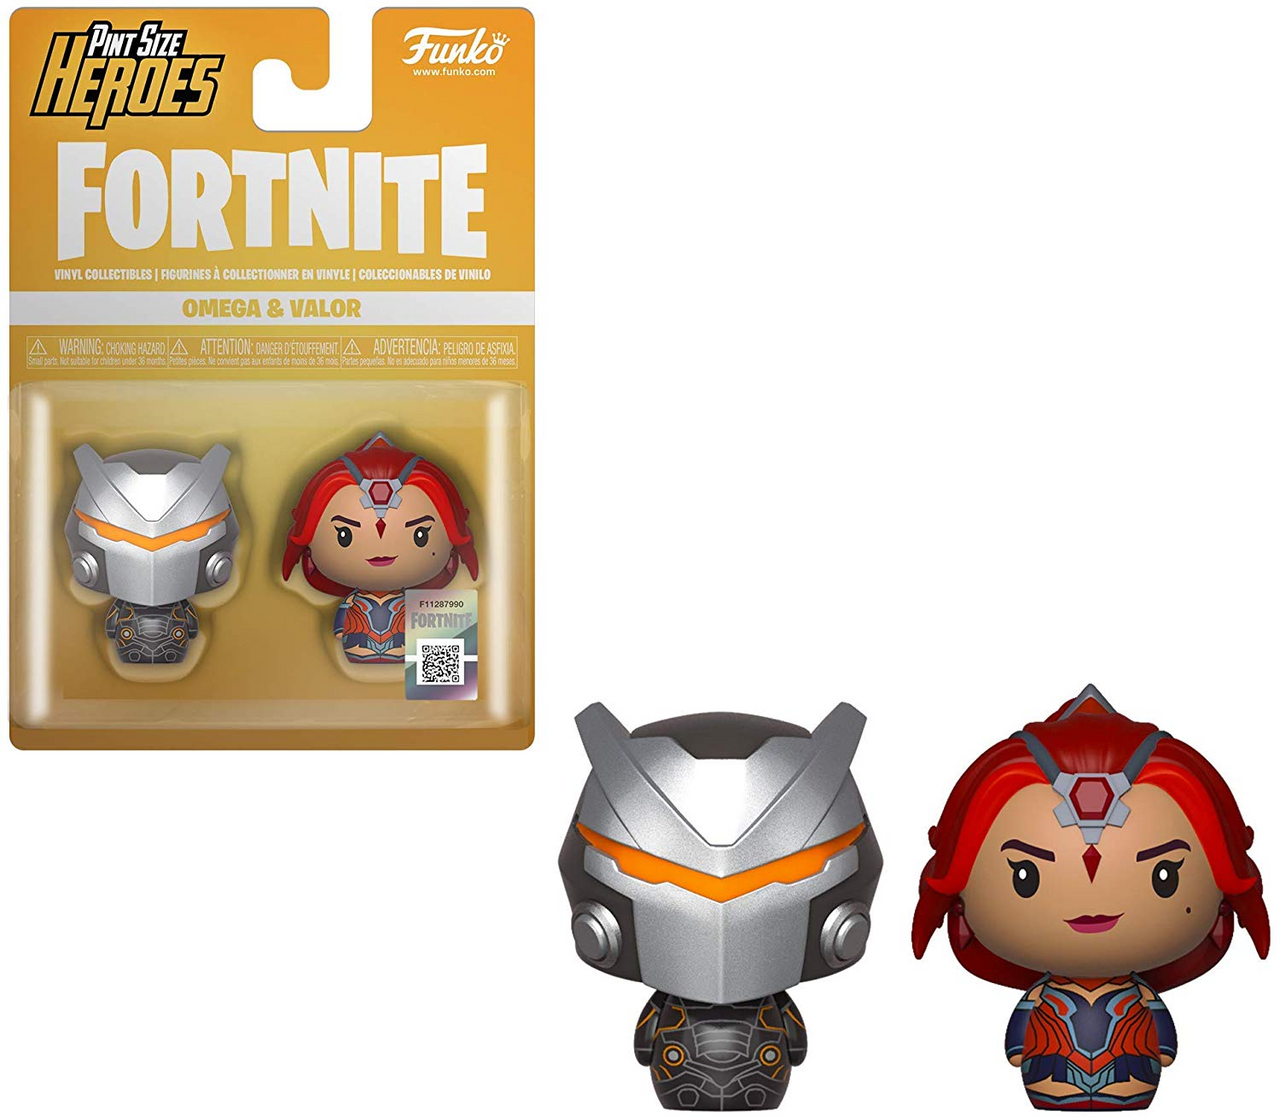 Funko Pint Size Heroes Fortnite: Omega Valor Vinyl Figure 2 Pack - Only 1 Available - Gemini Collectibles